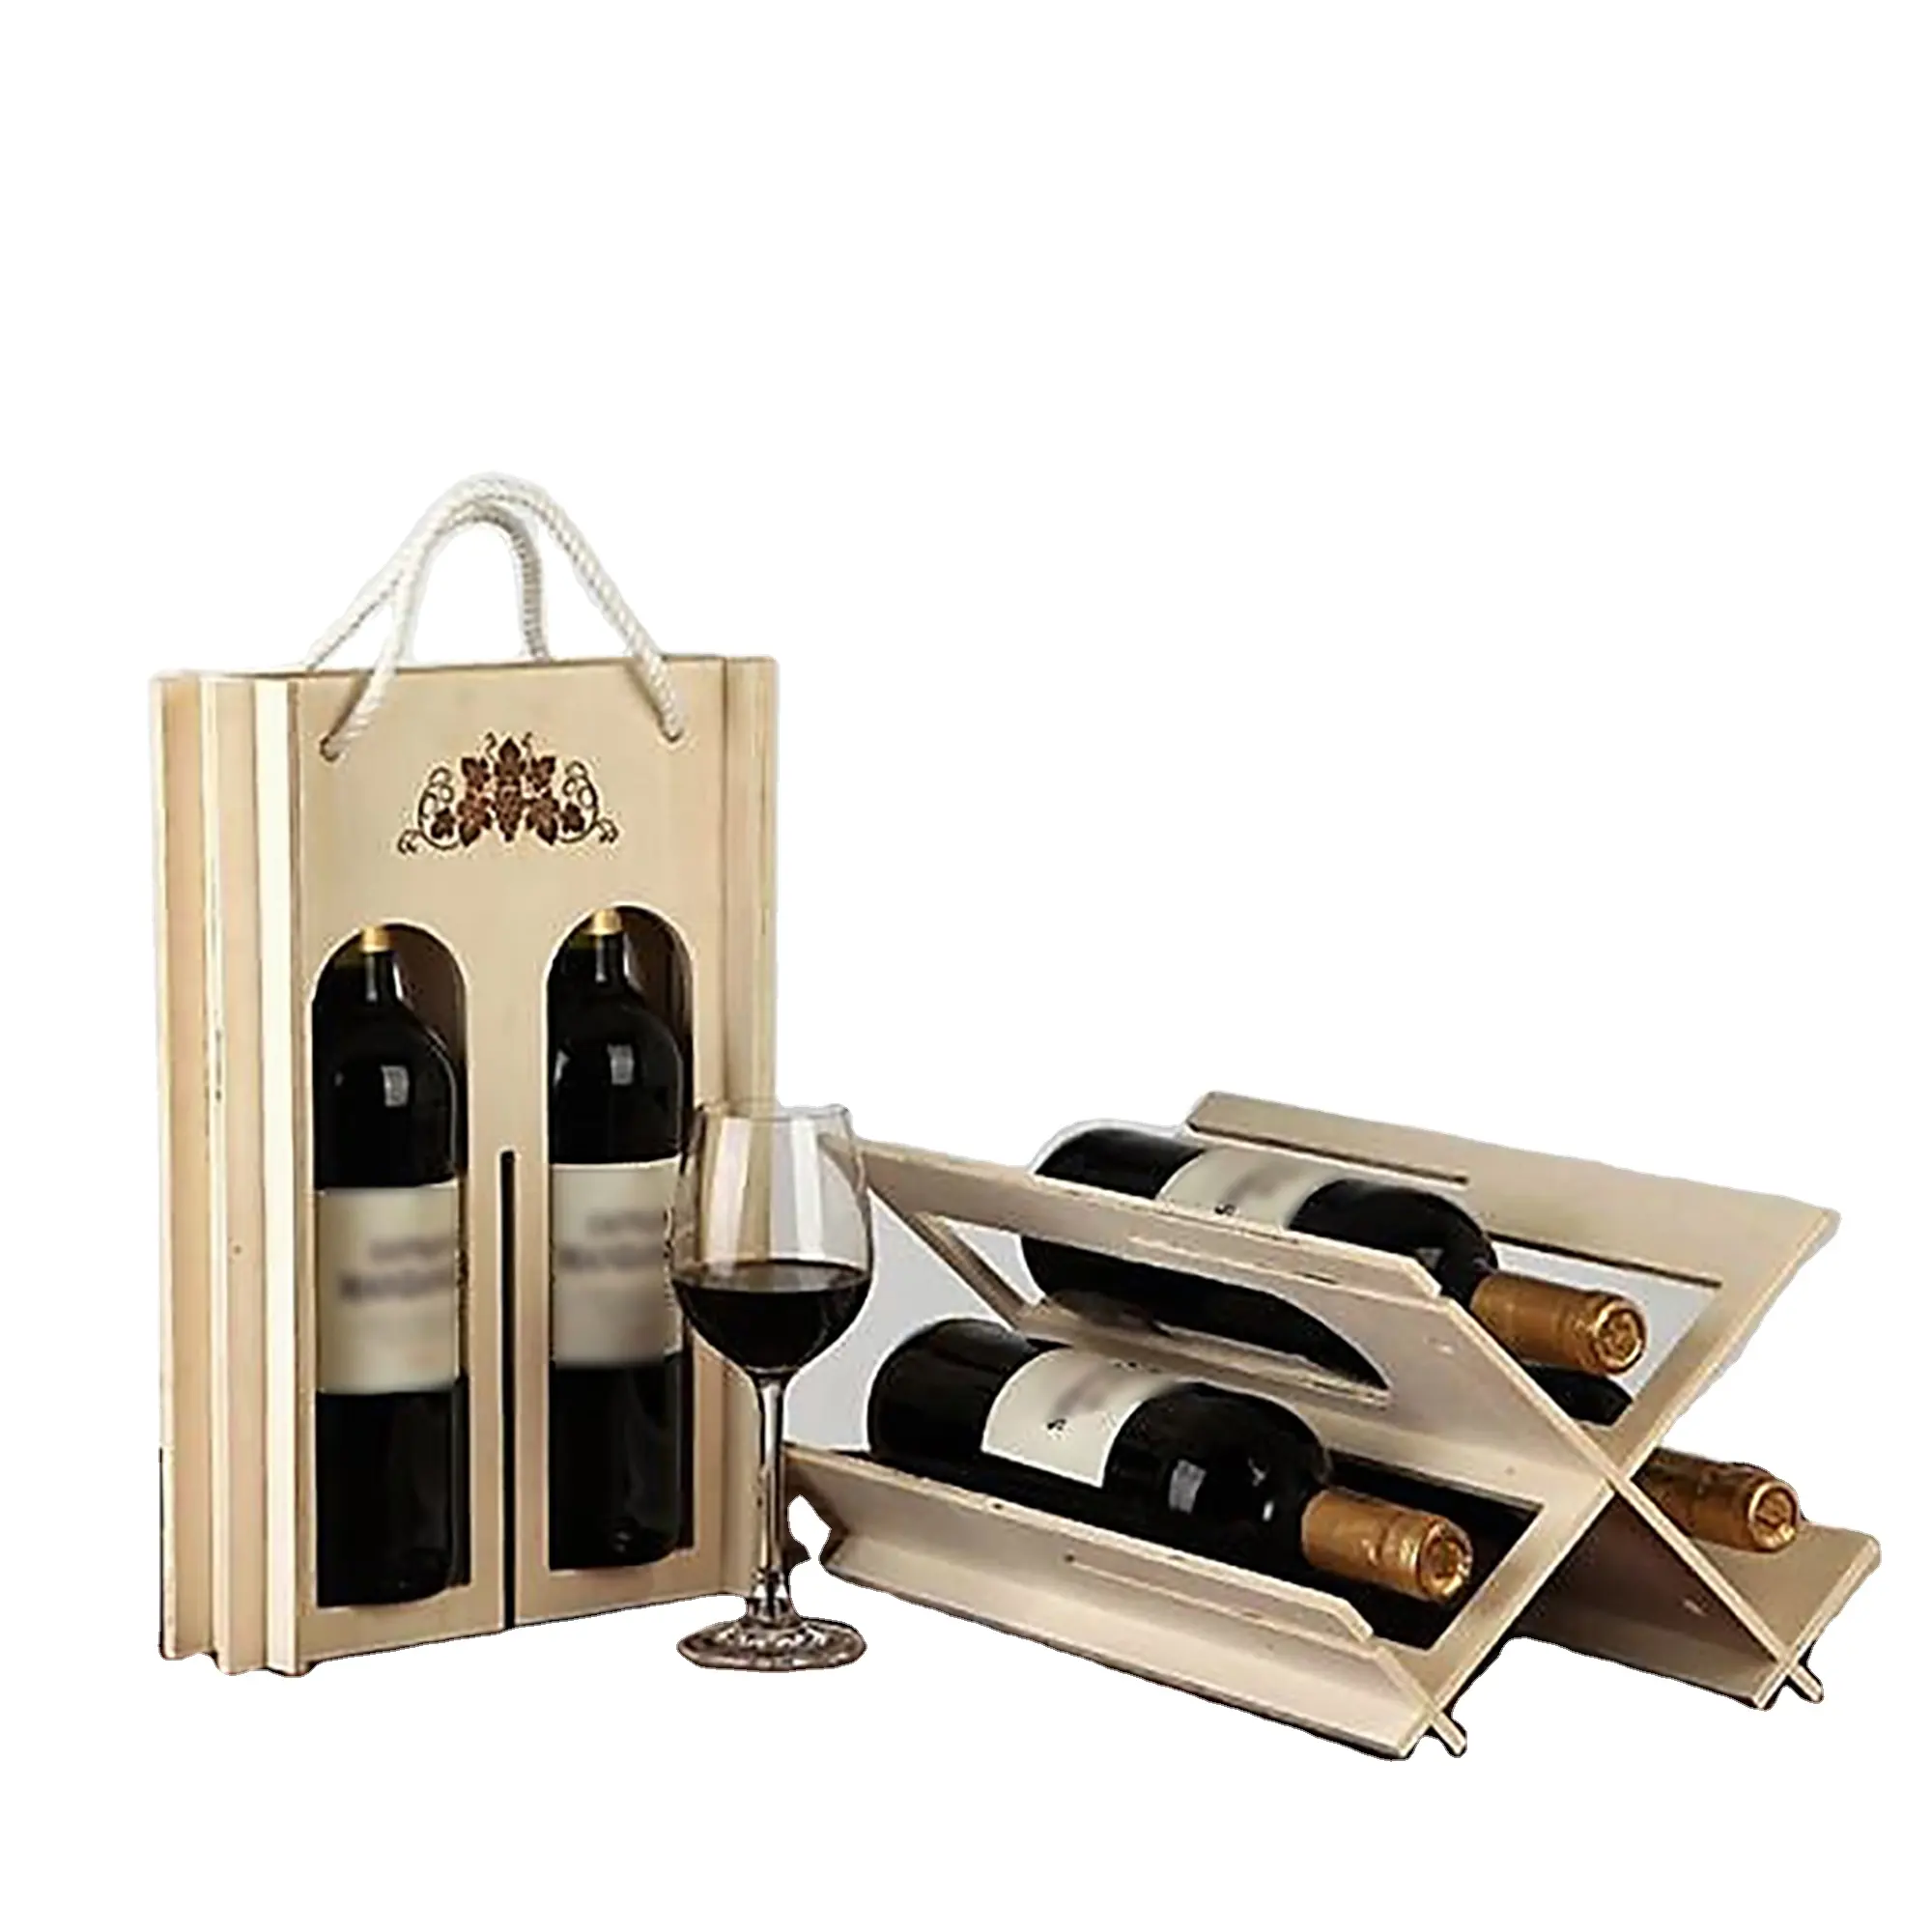 Kit wine box with 12 bottle wine box in Home Decoration Function